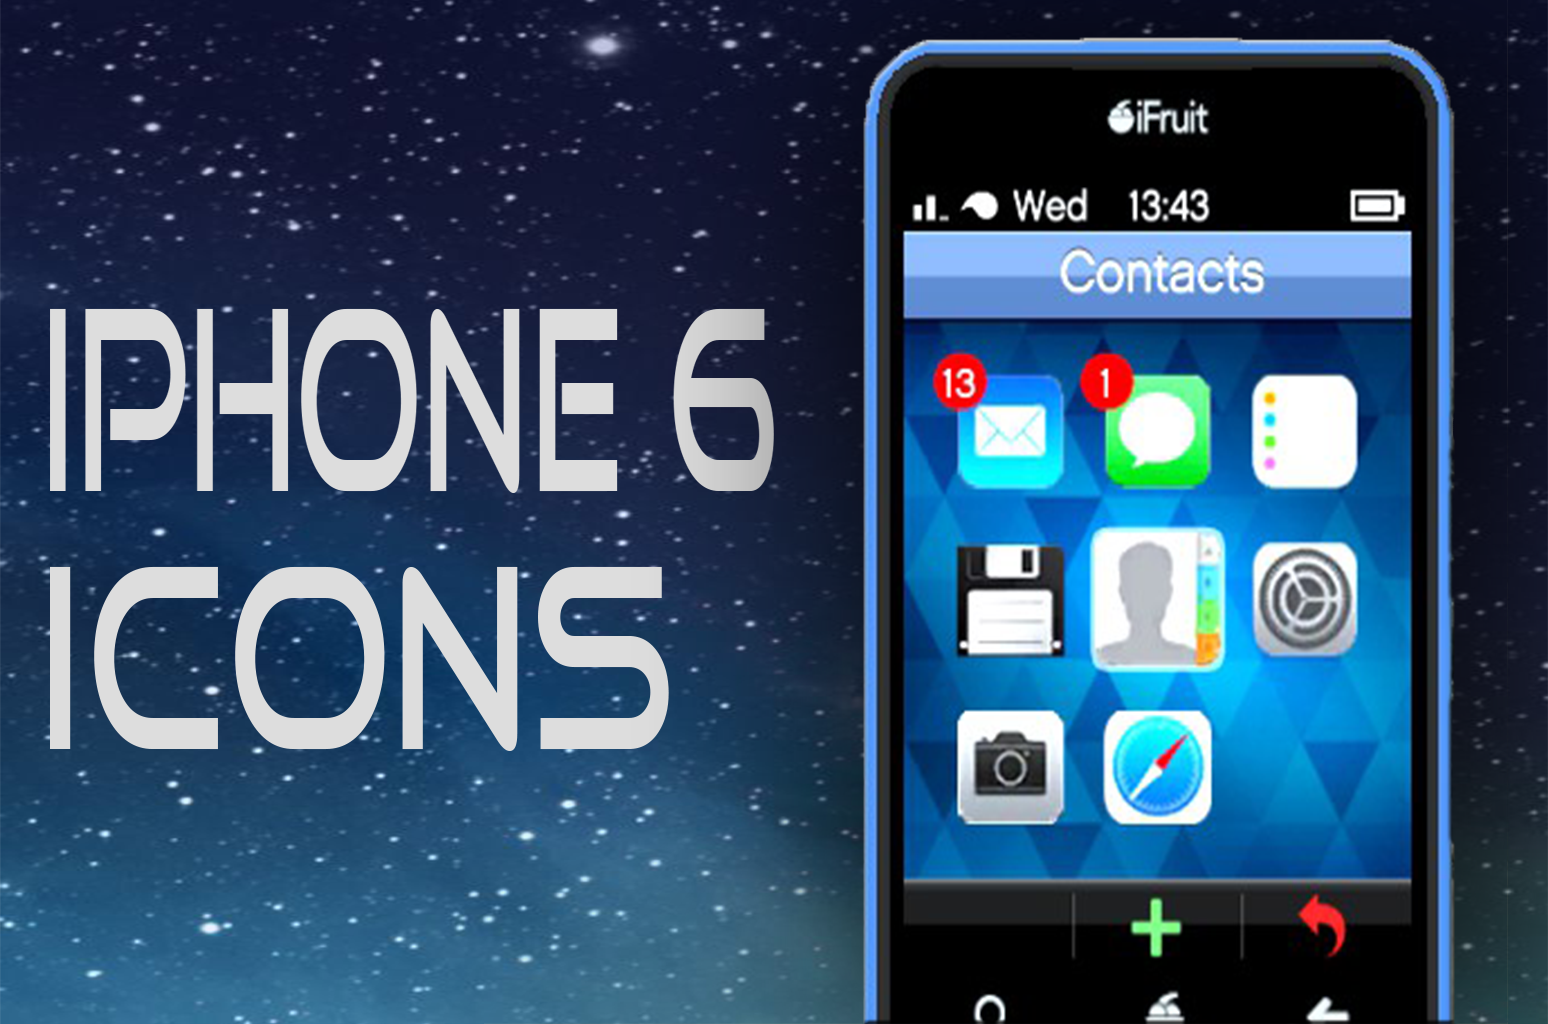 IPhone 6 Icons for iFruit - GTA5-Mods.com